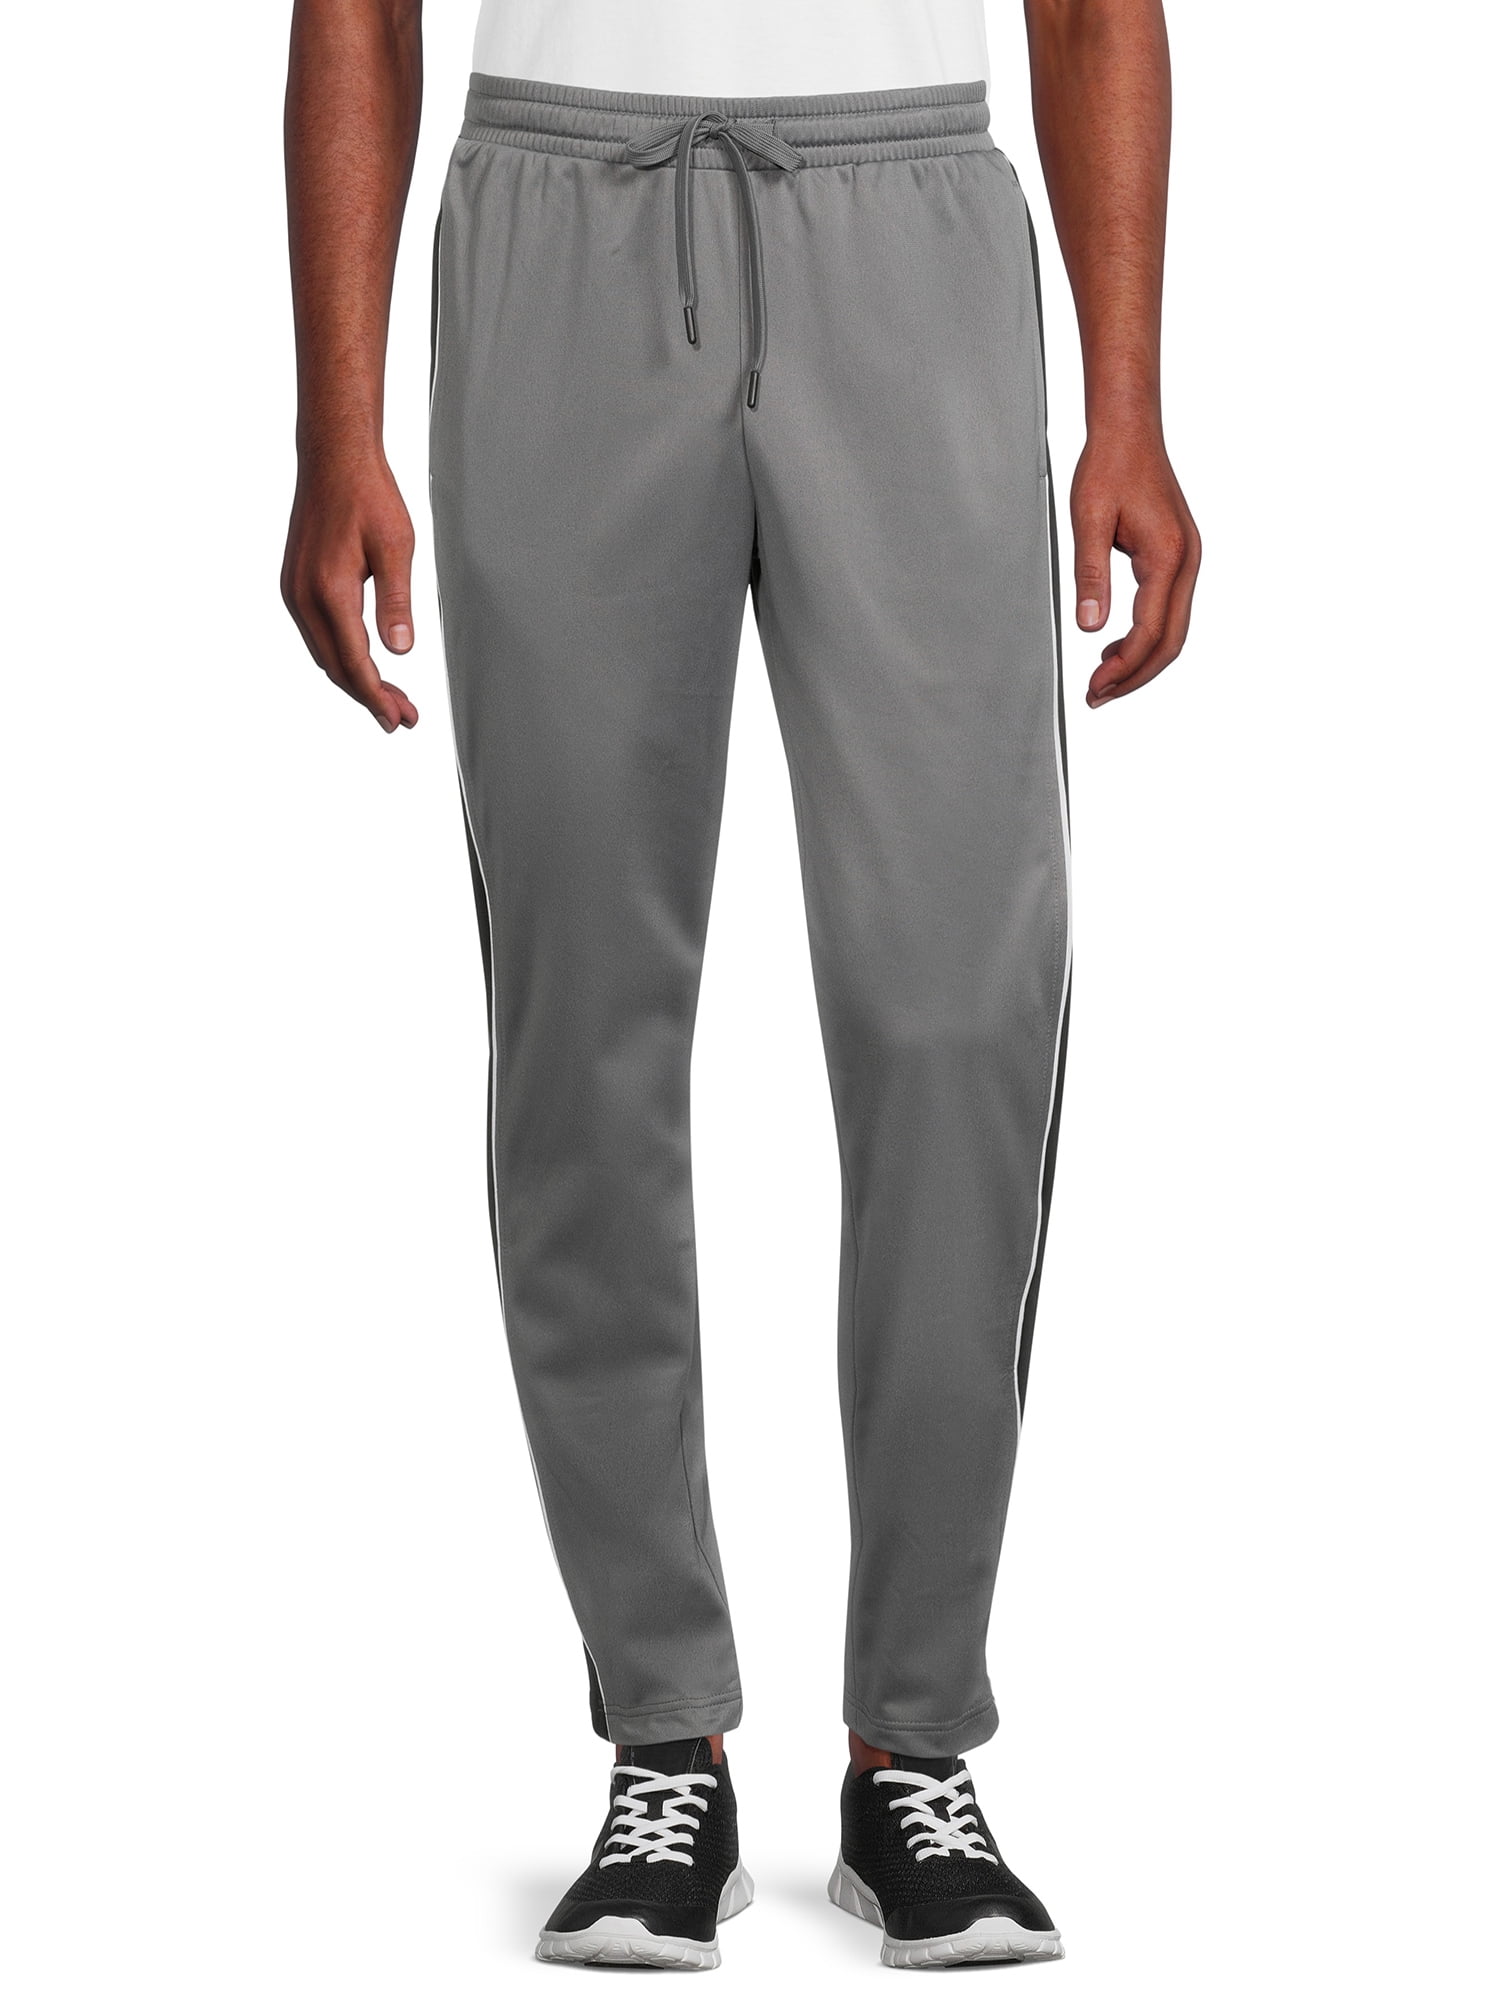 Male Polyester Plain Gym Training Track Pants at Rs 380/piece in